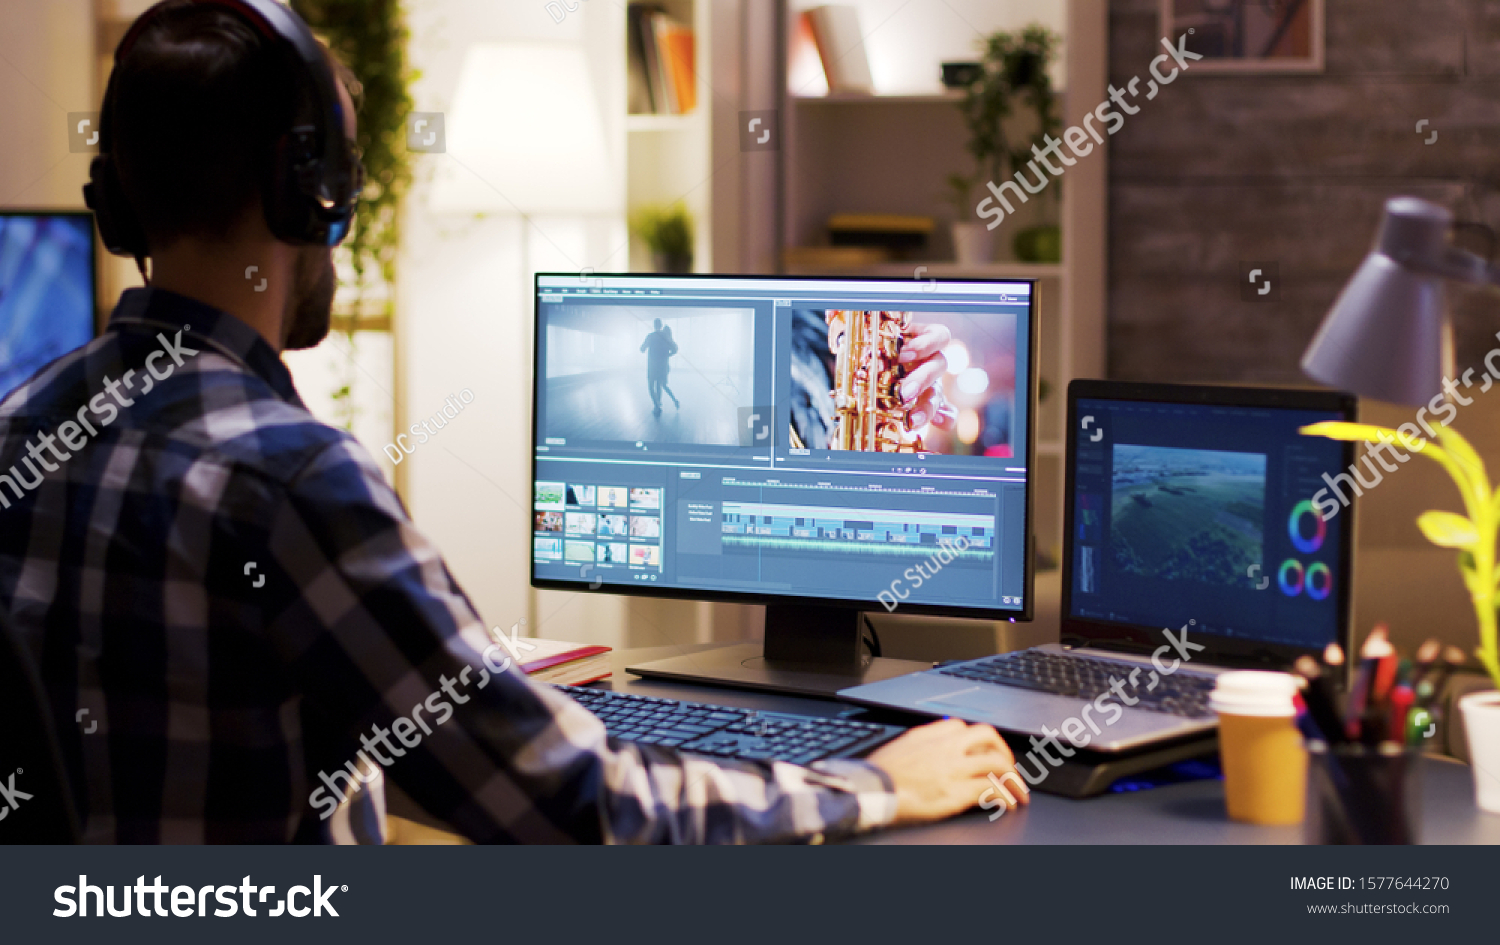 Film maker pointing at the monitor in home office while working on post production for a movie. Video editor wearing headphones. #1577644270